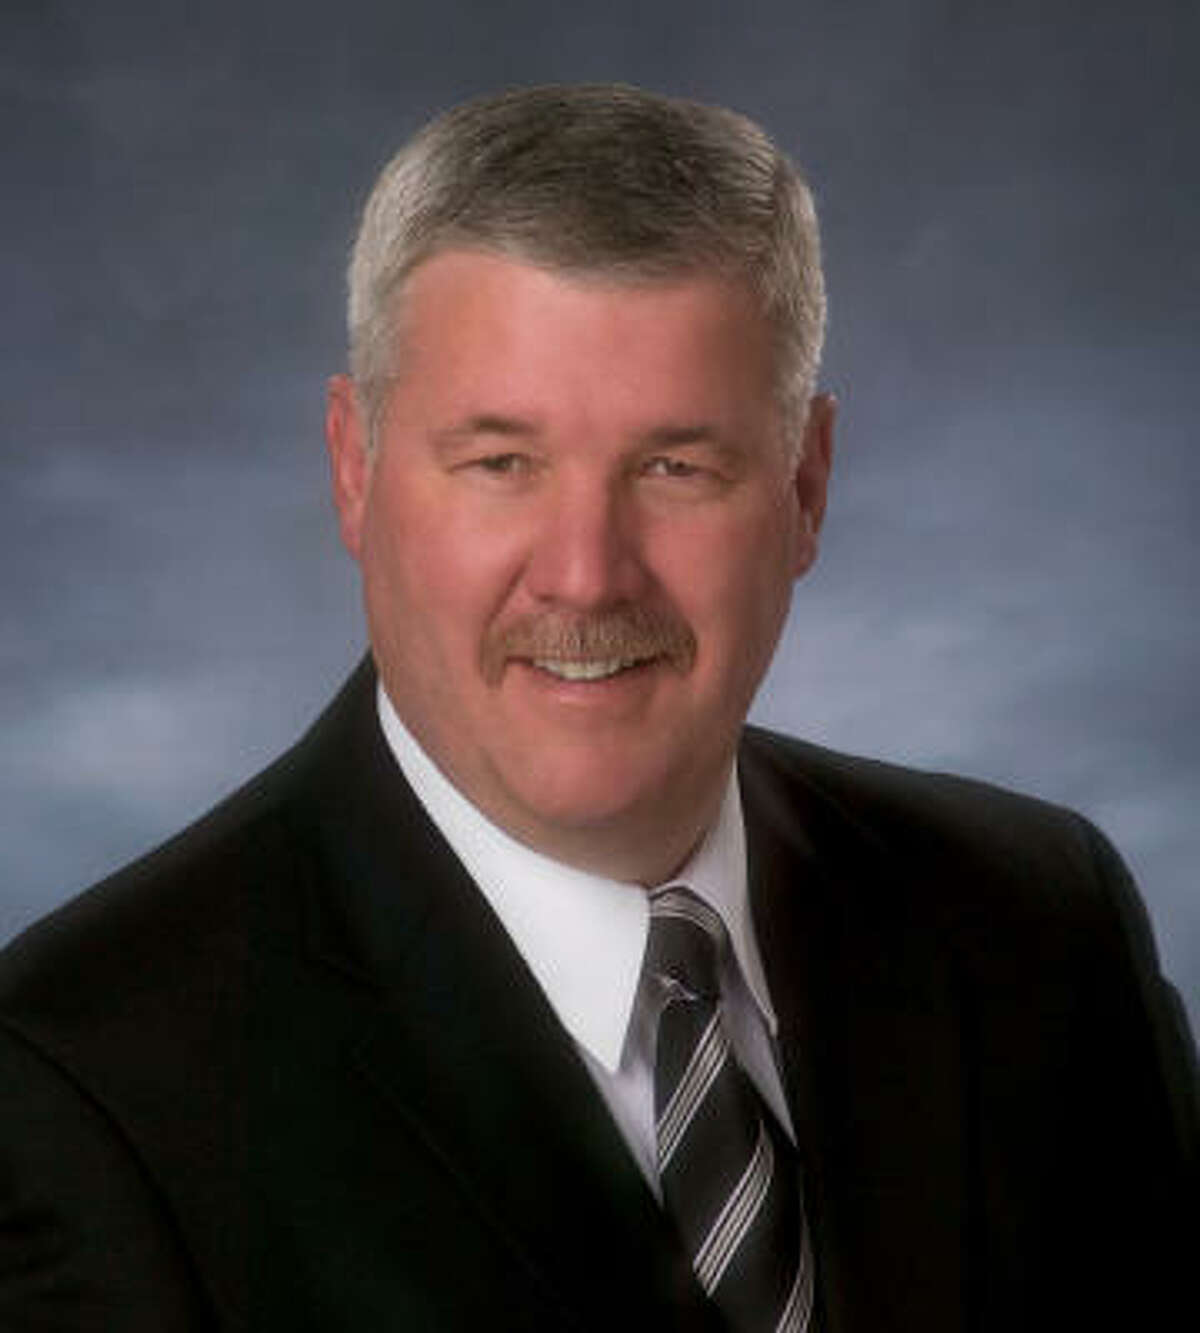 Hank Gilbert, pictured, has accused incumbent Republican Todd Staples of buying a vehicle with campaign funds.